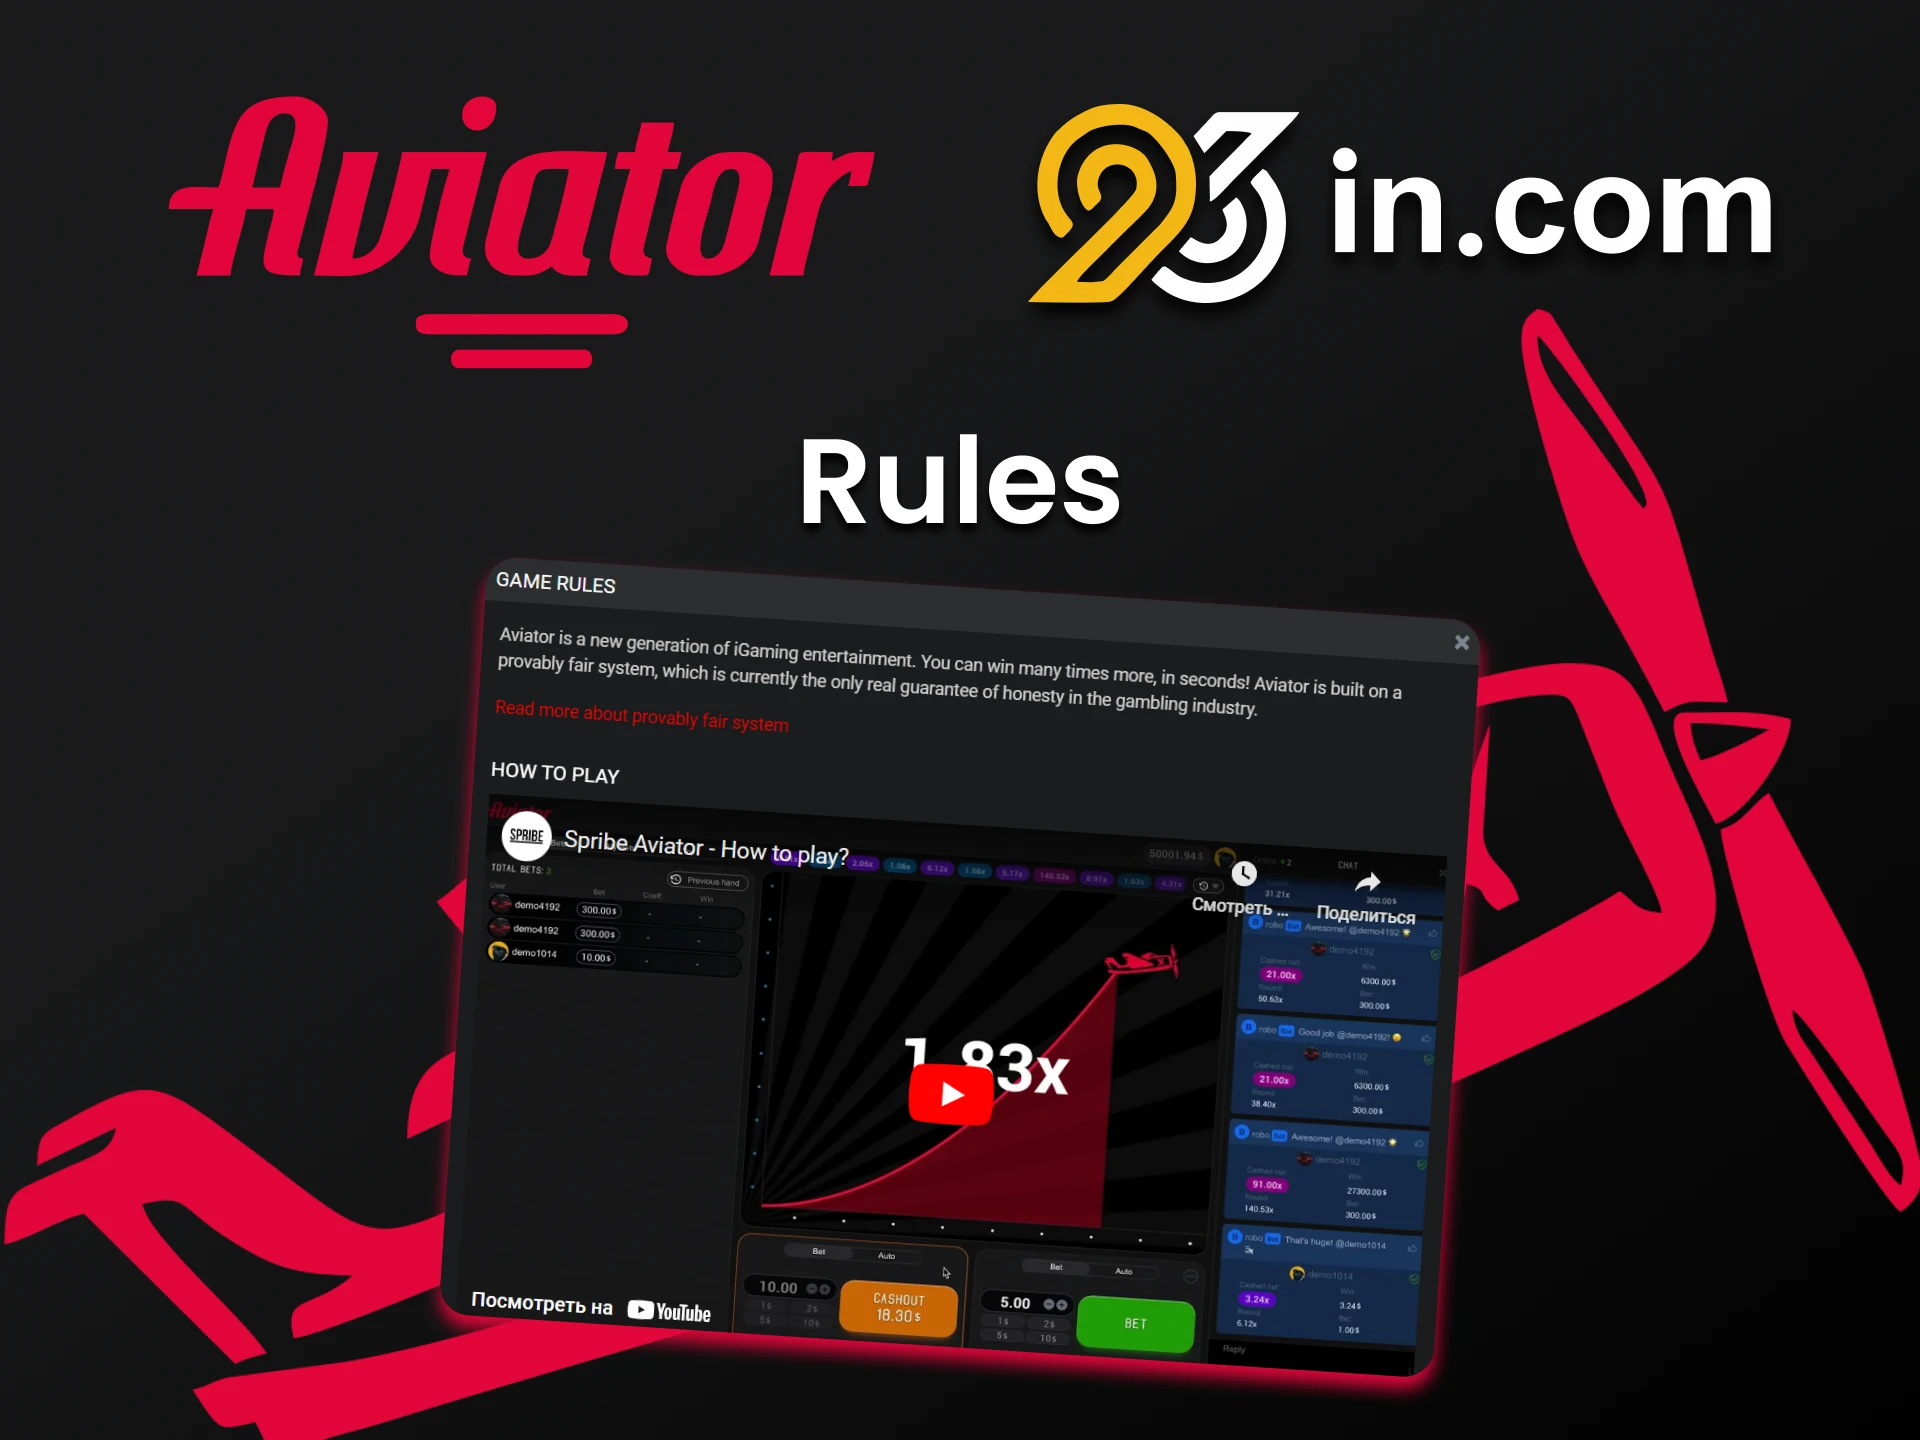 Learn the Aviator rules for 96in wins.